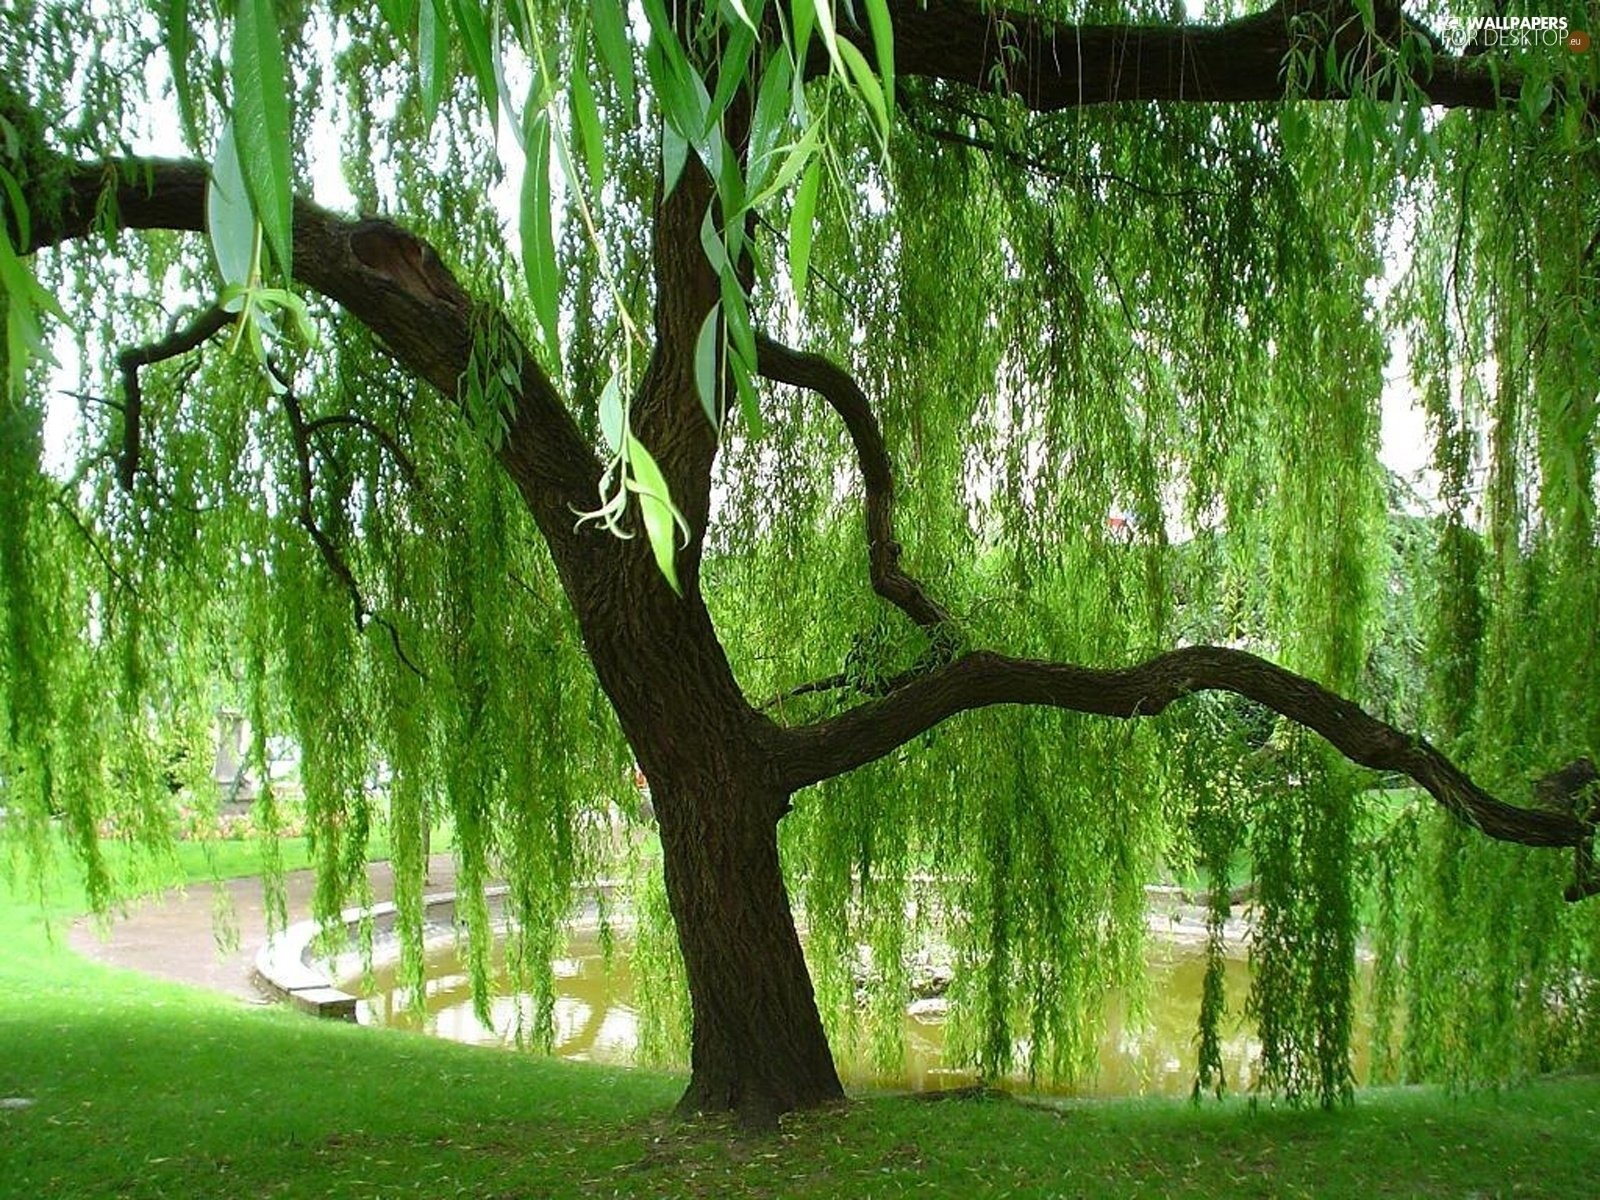 Weeping Willow Tree Image - ID: 30894 - Image Abyss